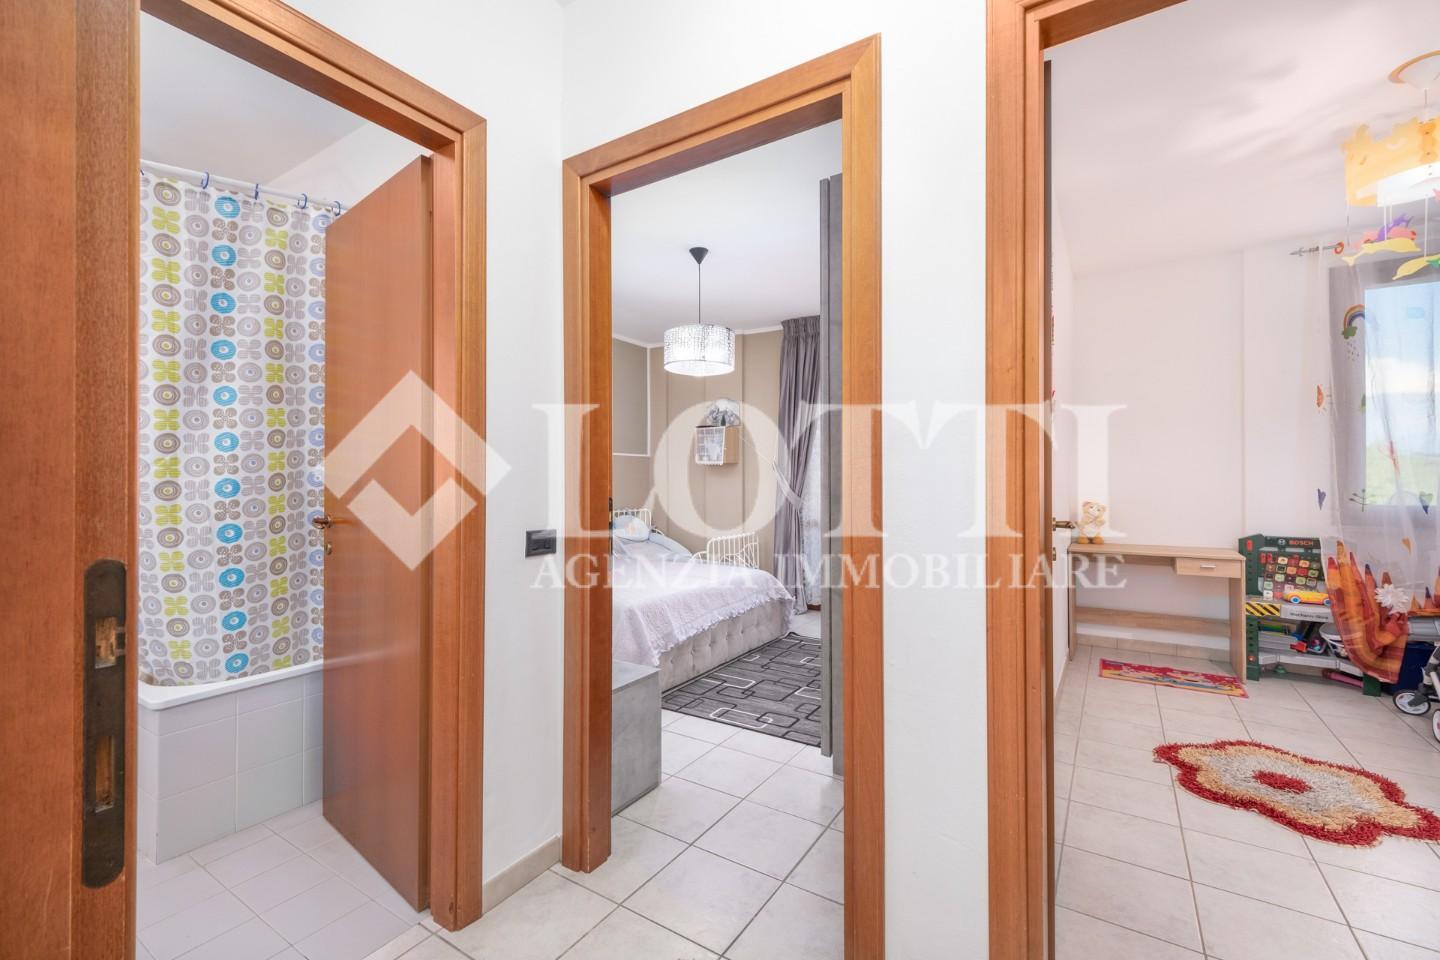 Apartment for sale, ref. 819